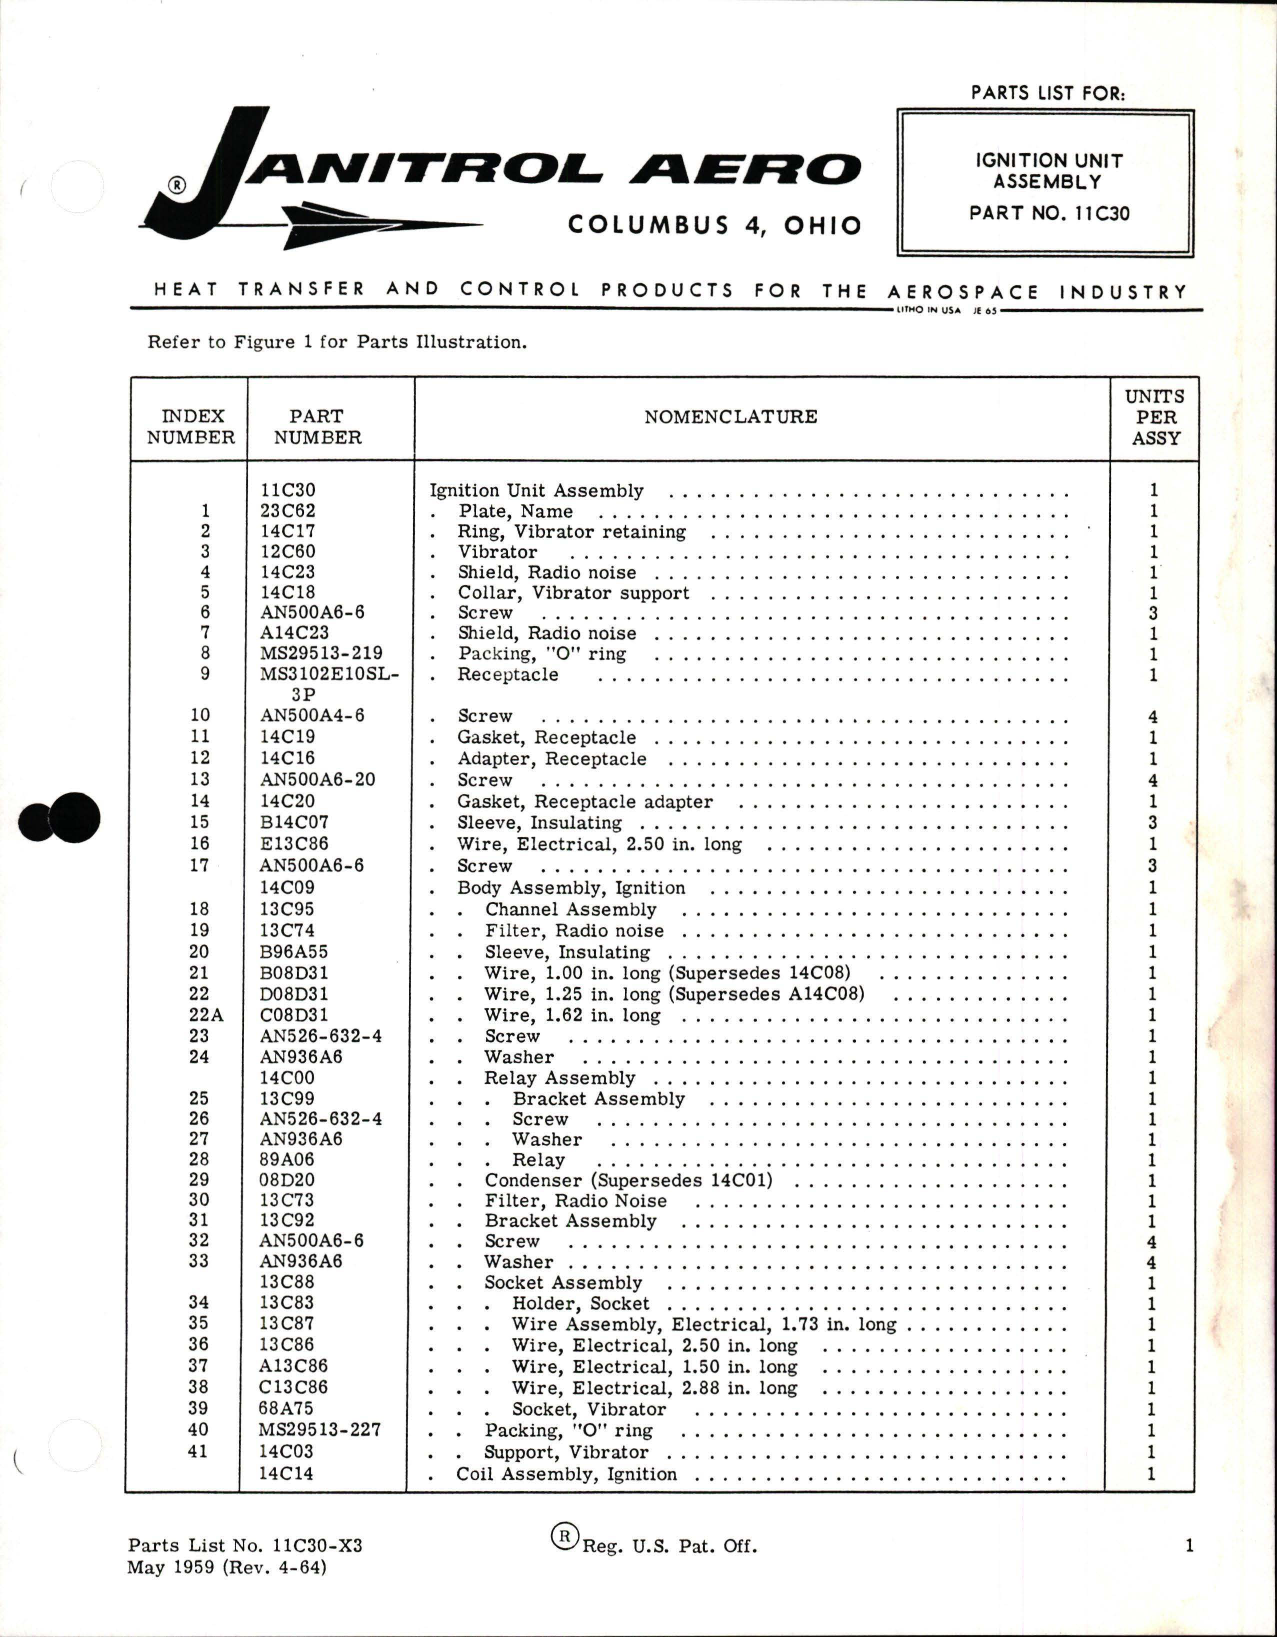 Sample page 1 from AirCorps Library document: Parts List for Ignition Unit Assembly - Part 11C30